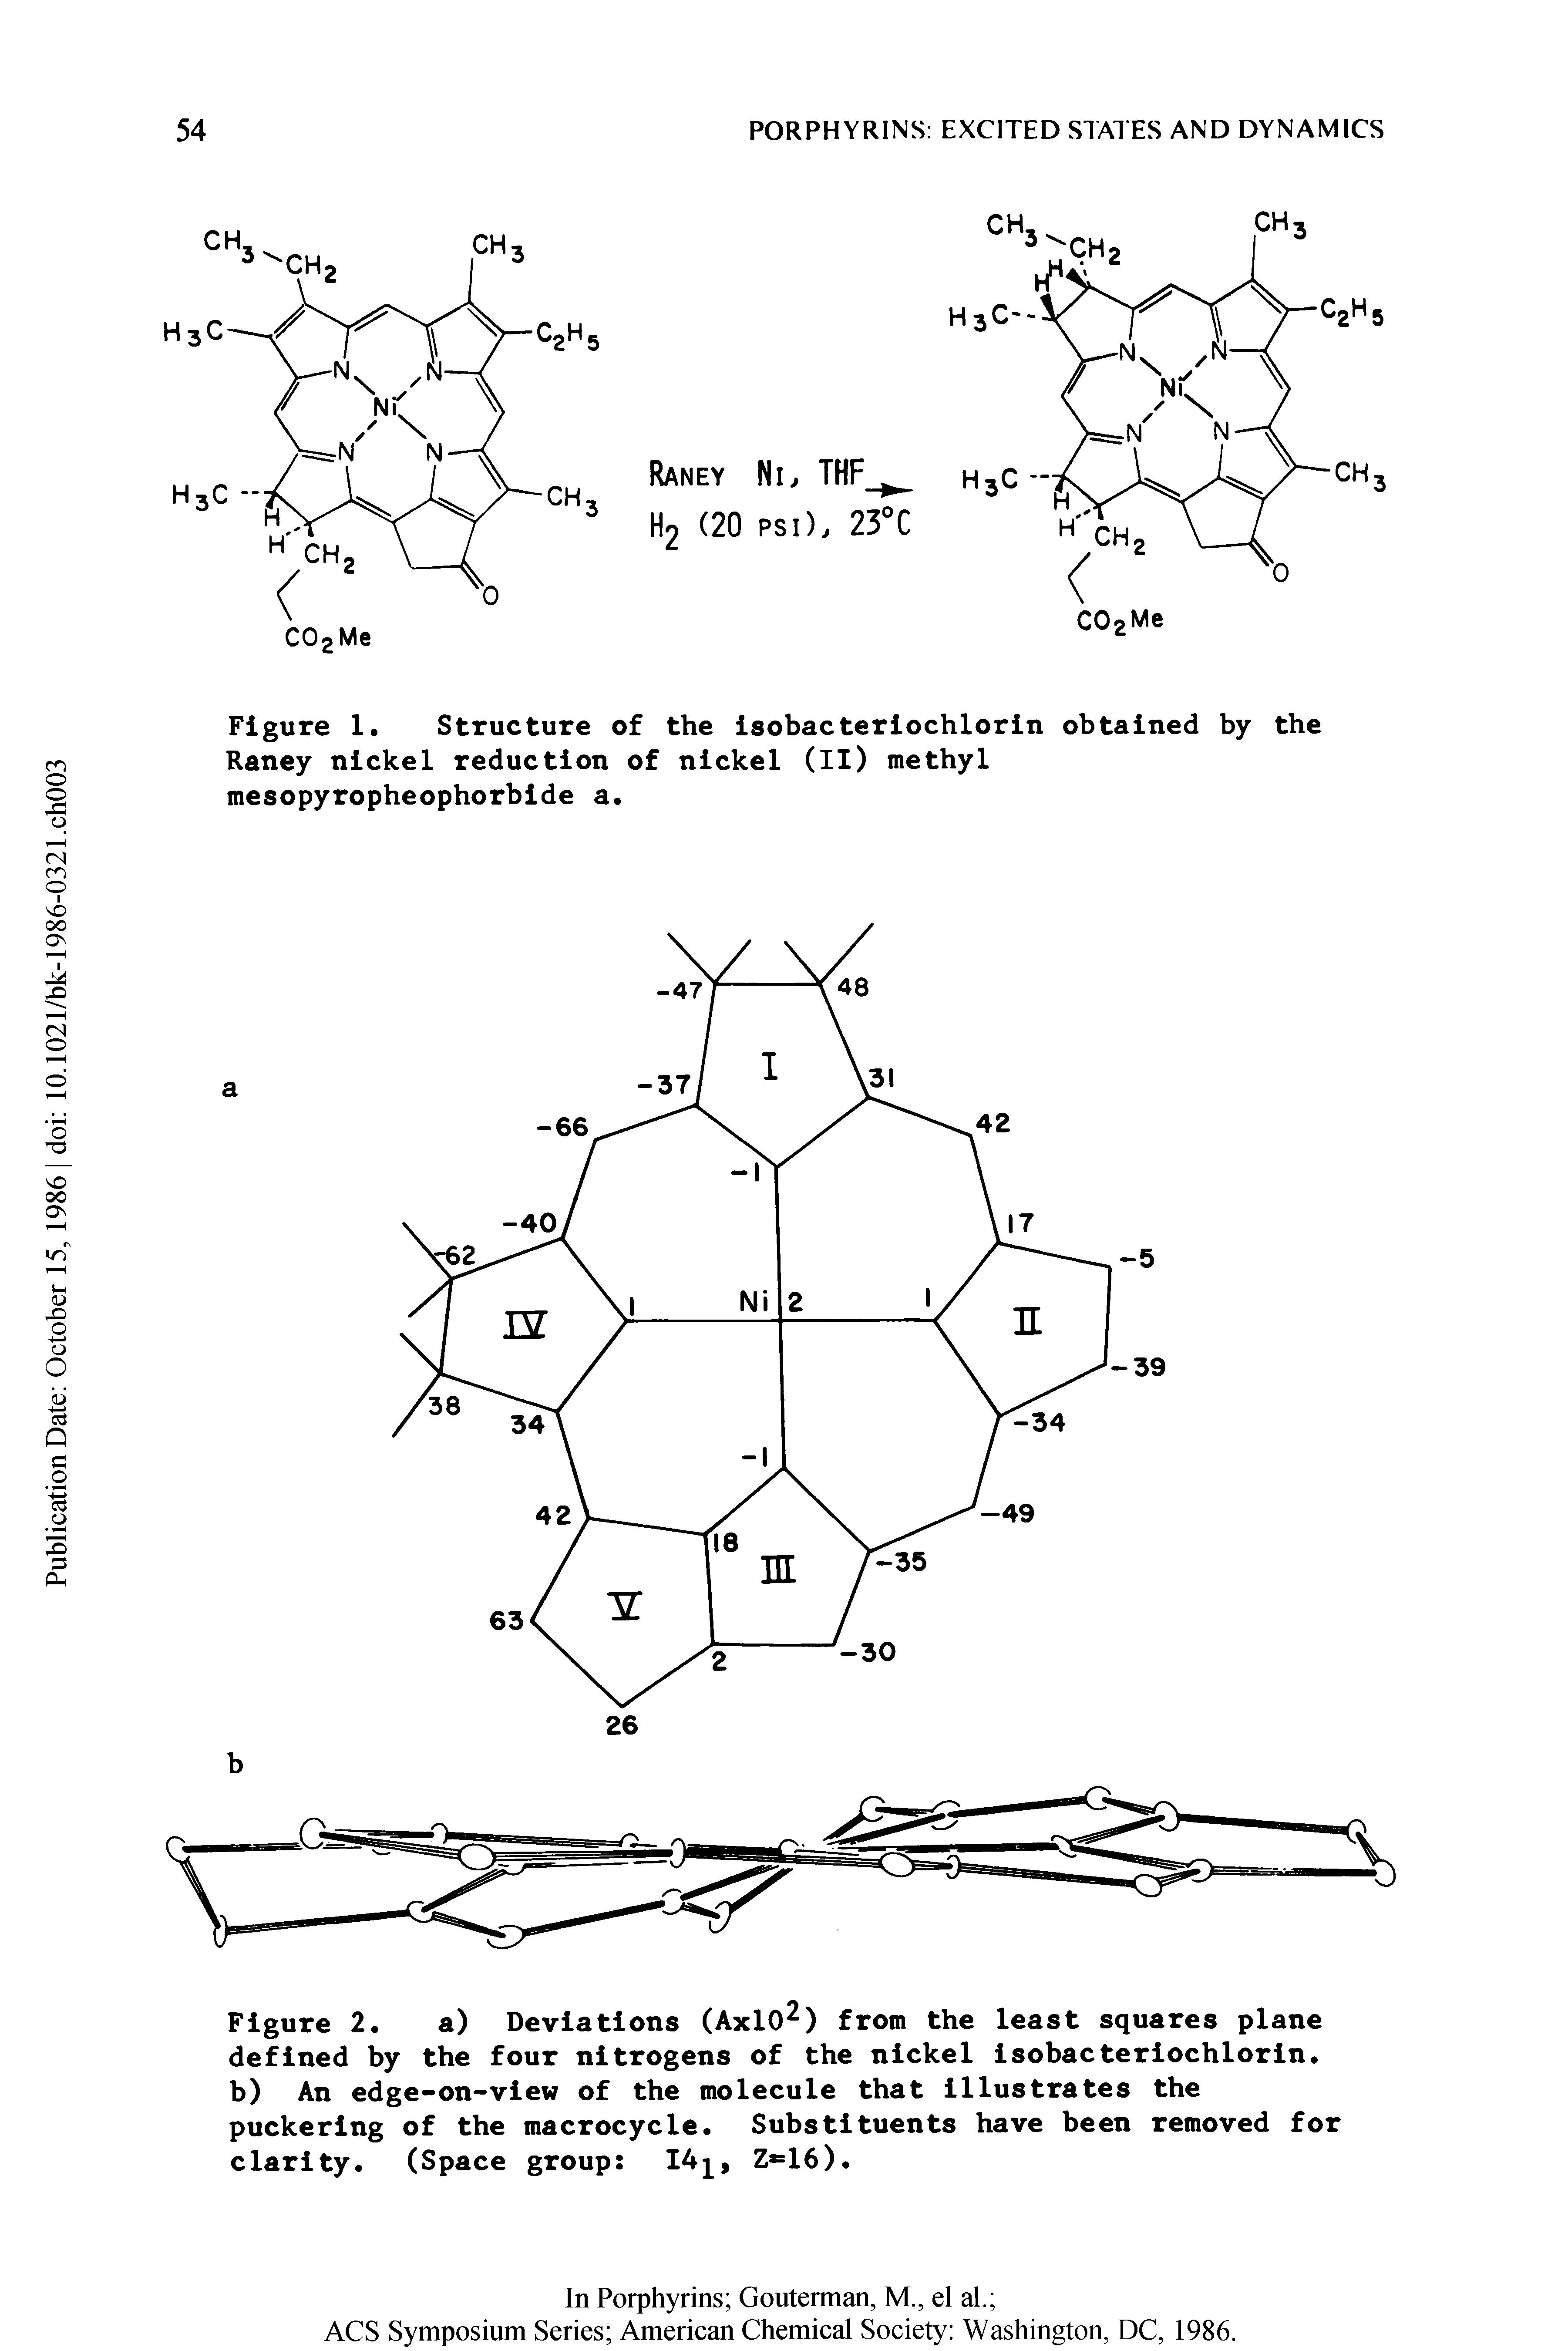 Figure 1. Structure of the Isobacterlochlorln obtained by the Raney nickel reduction of nickel (II) methyl mesopyropheophorblde a.